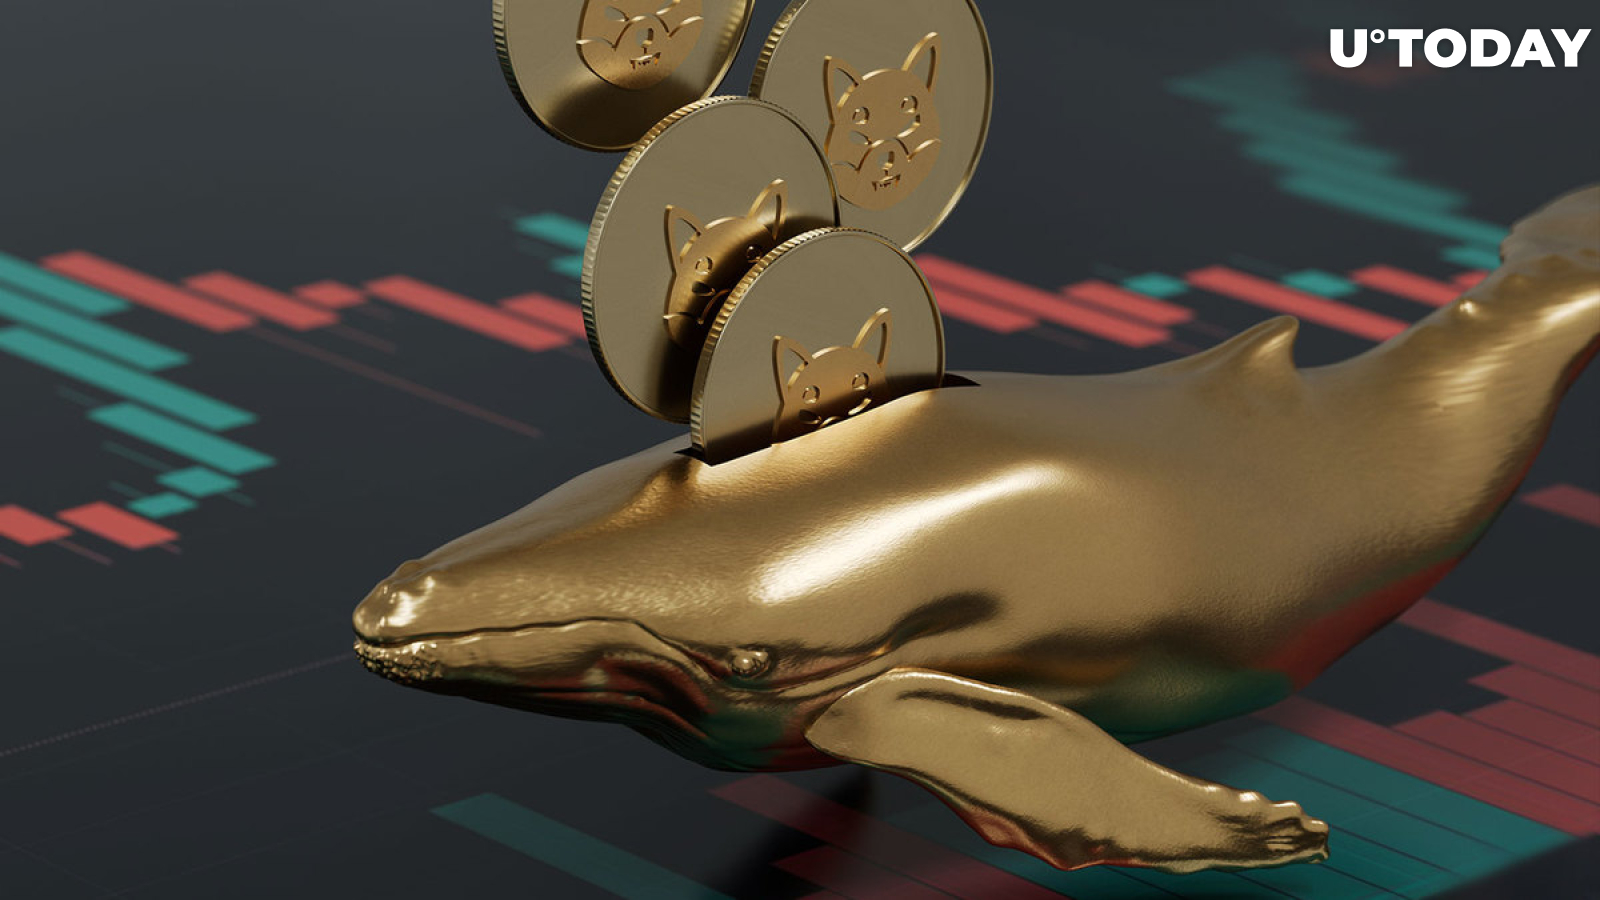 SHIB Among Top Traded Cryptos by Whales, but There's Dark Side